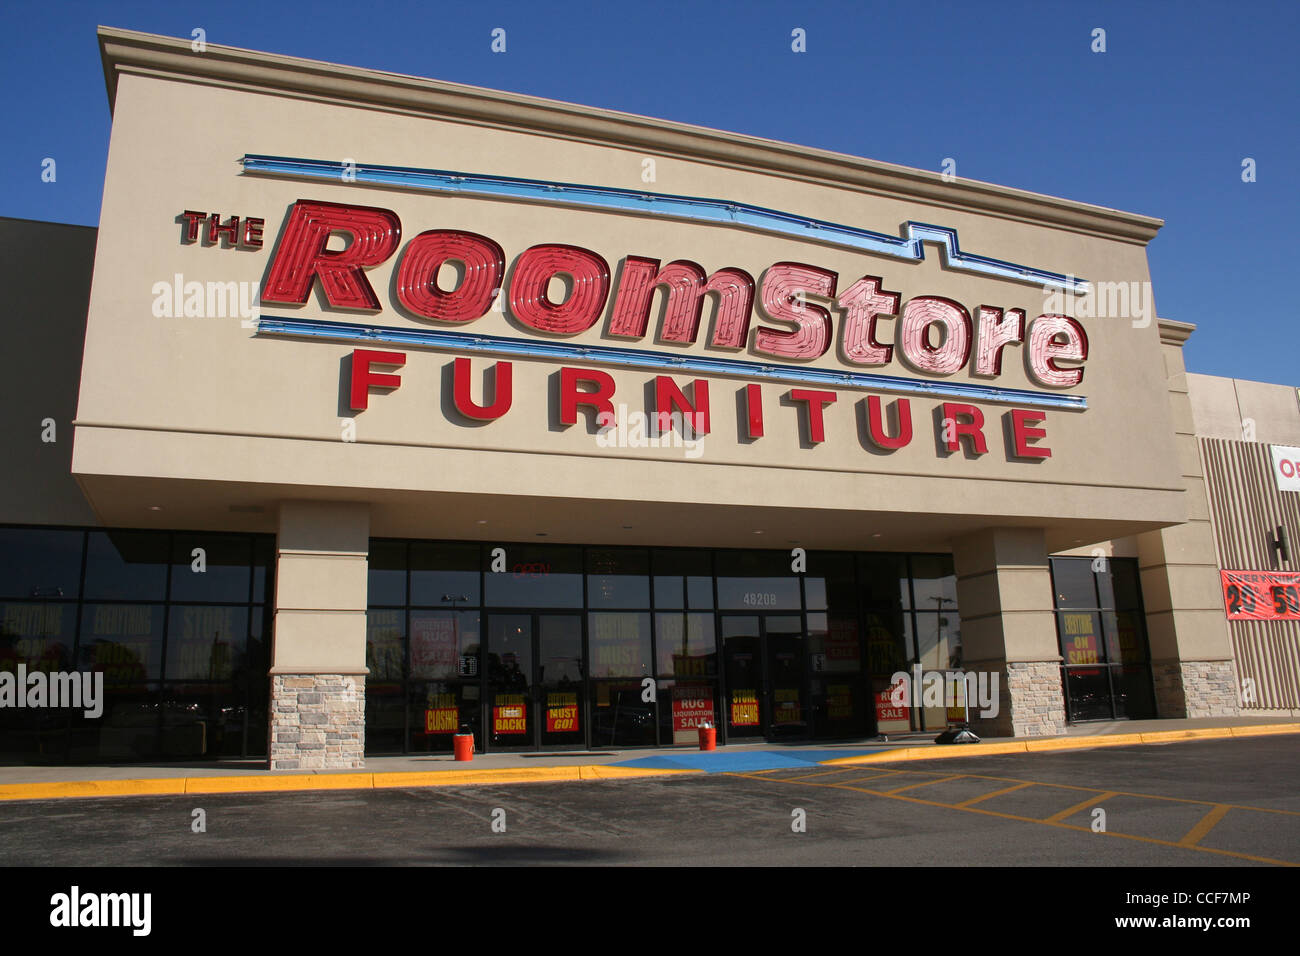 The Roomstore Furniture Store Closing Sale Tyler Tx January